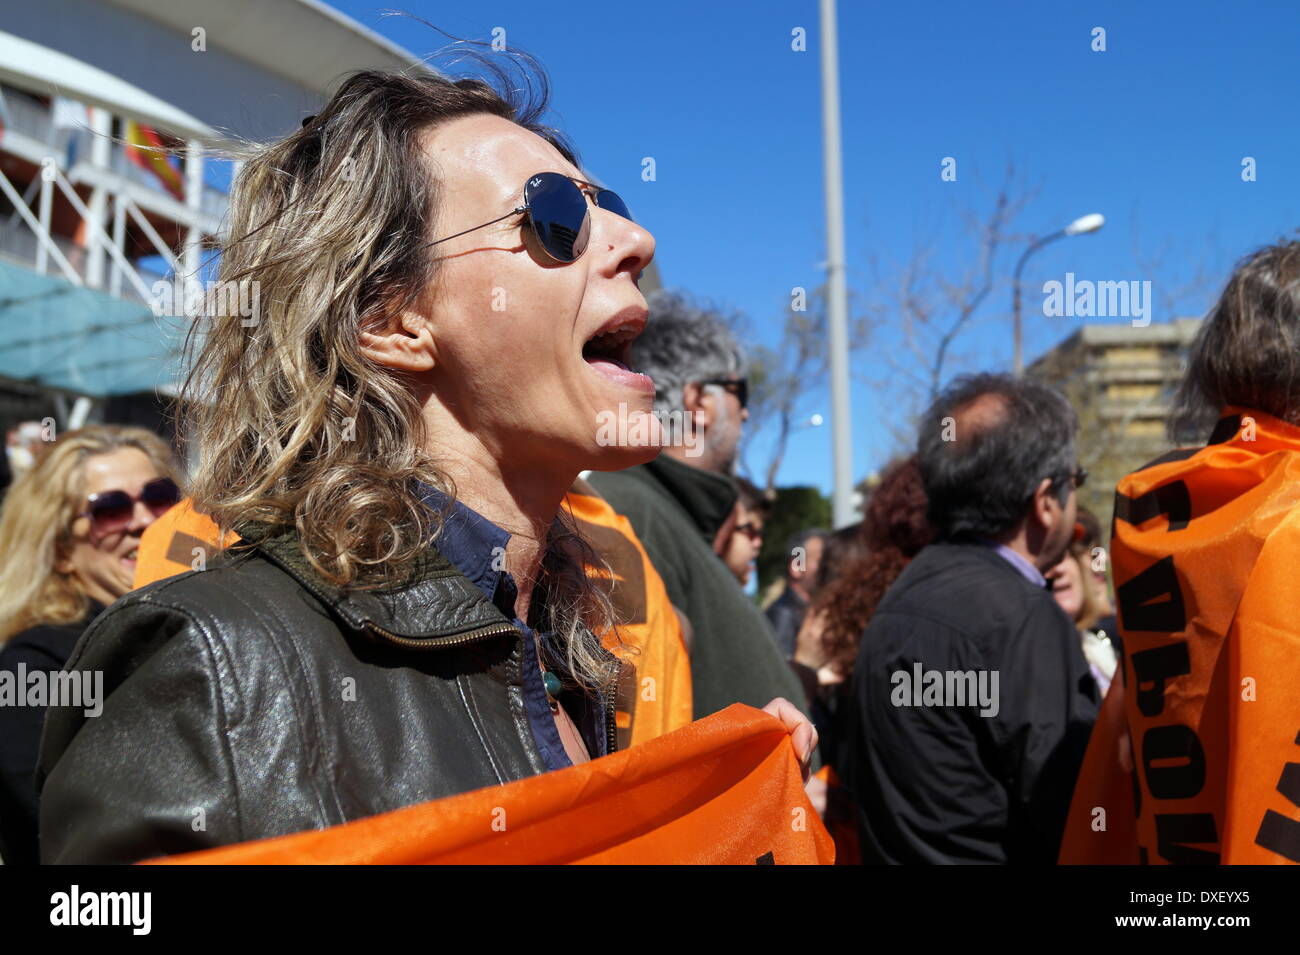 Thessaloniki, Greece. 25th March 2014. Schoolteachers chant anti-austerity slogans during the Greek independence day parade on Tuesday, in the northern port city of Thessaloniki, Greece's second largest city. Greeks celebrated their national independence day amid tight security and protest in the northern port city of Thessaloniki, as school teachers staged a protest against planned layoffs as part of governments cost cutting reforms.  Credit:  Orhan Tsolak/Alamy Live News Stock Photo